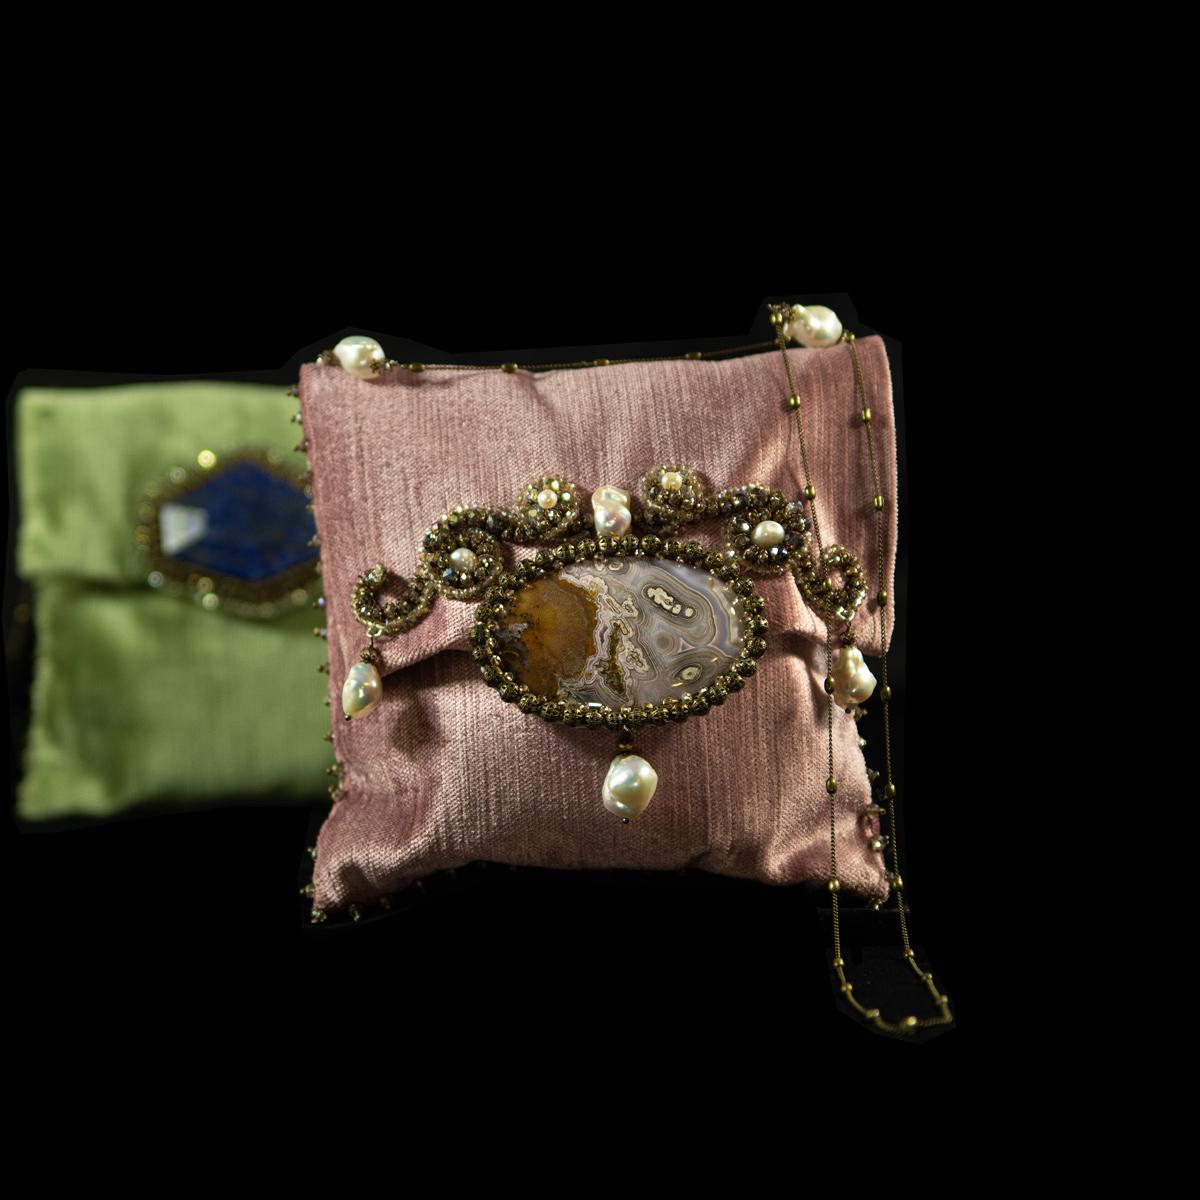 Handmade handbag in pink velvet with bronze shoulder strap, Mexican agua neva agate,
scaramazza pearls and rutilated quartz. Our handbags have been made always with precious and refined fabrics, accurate in the details. Each bag is therefore unique,